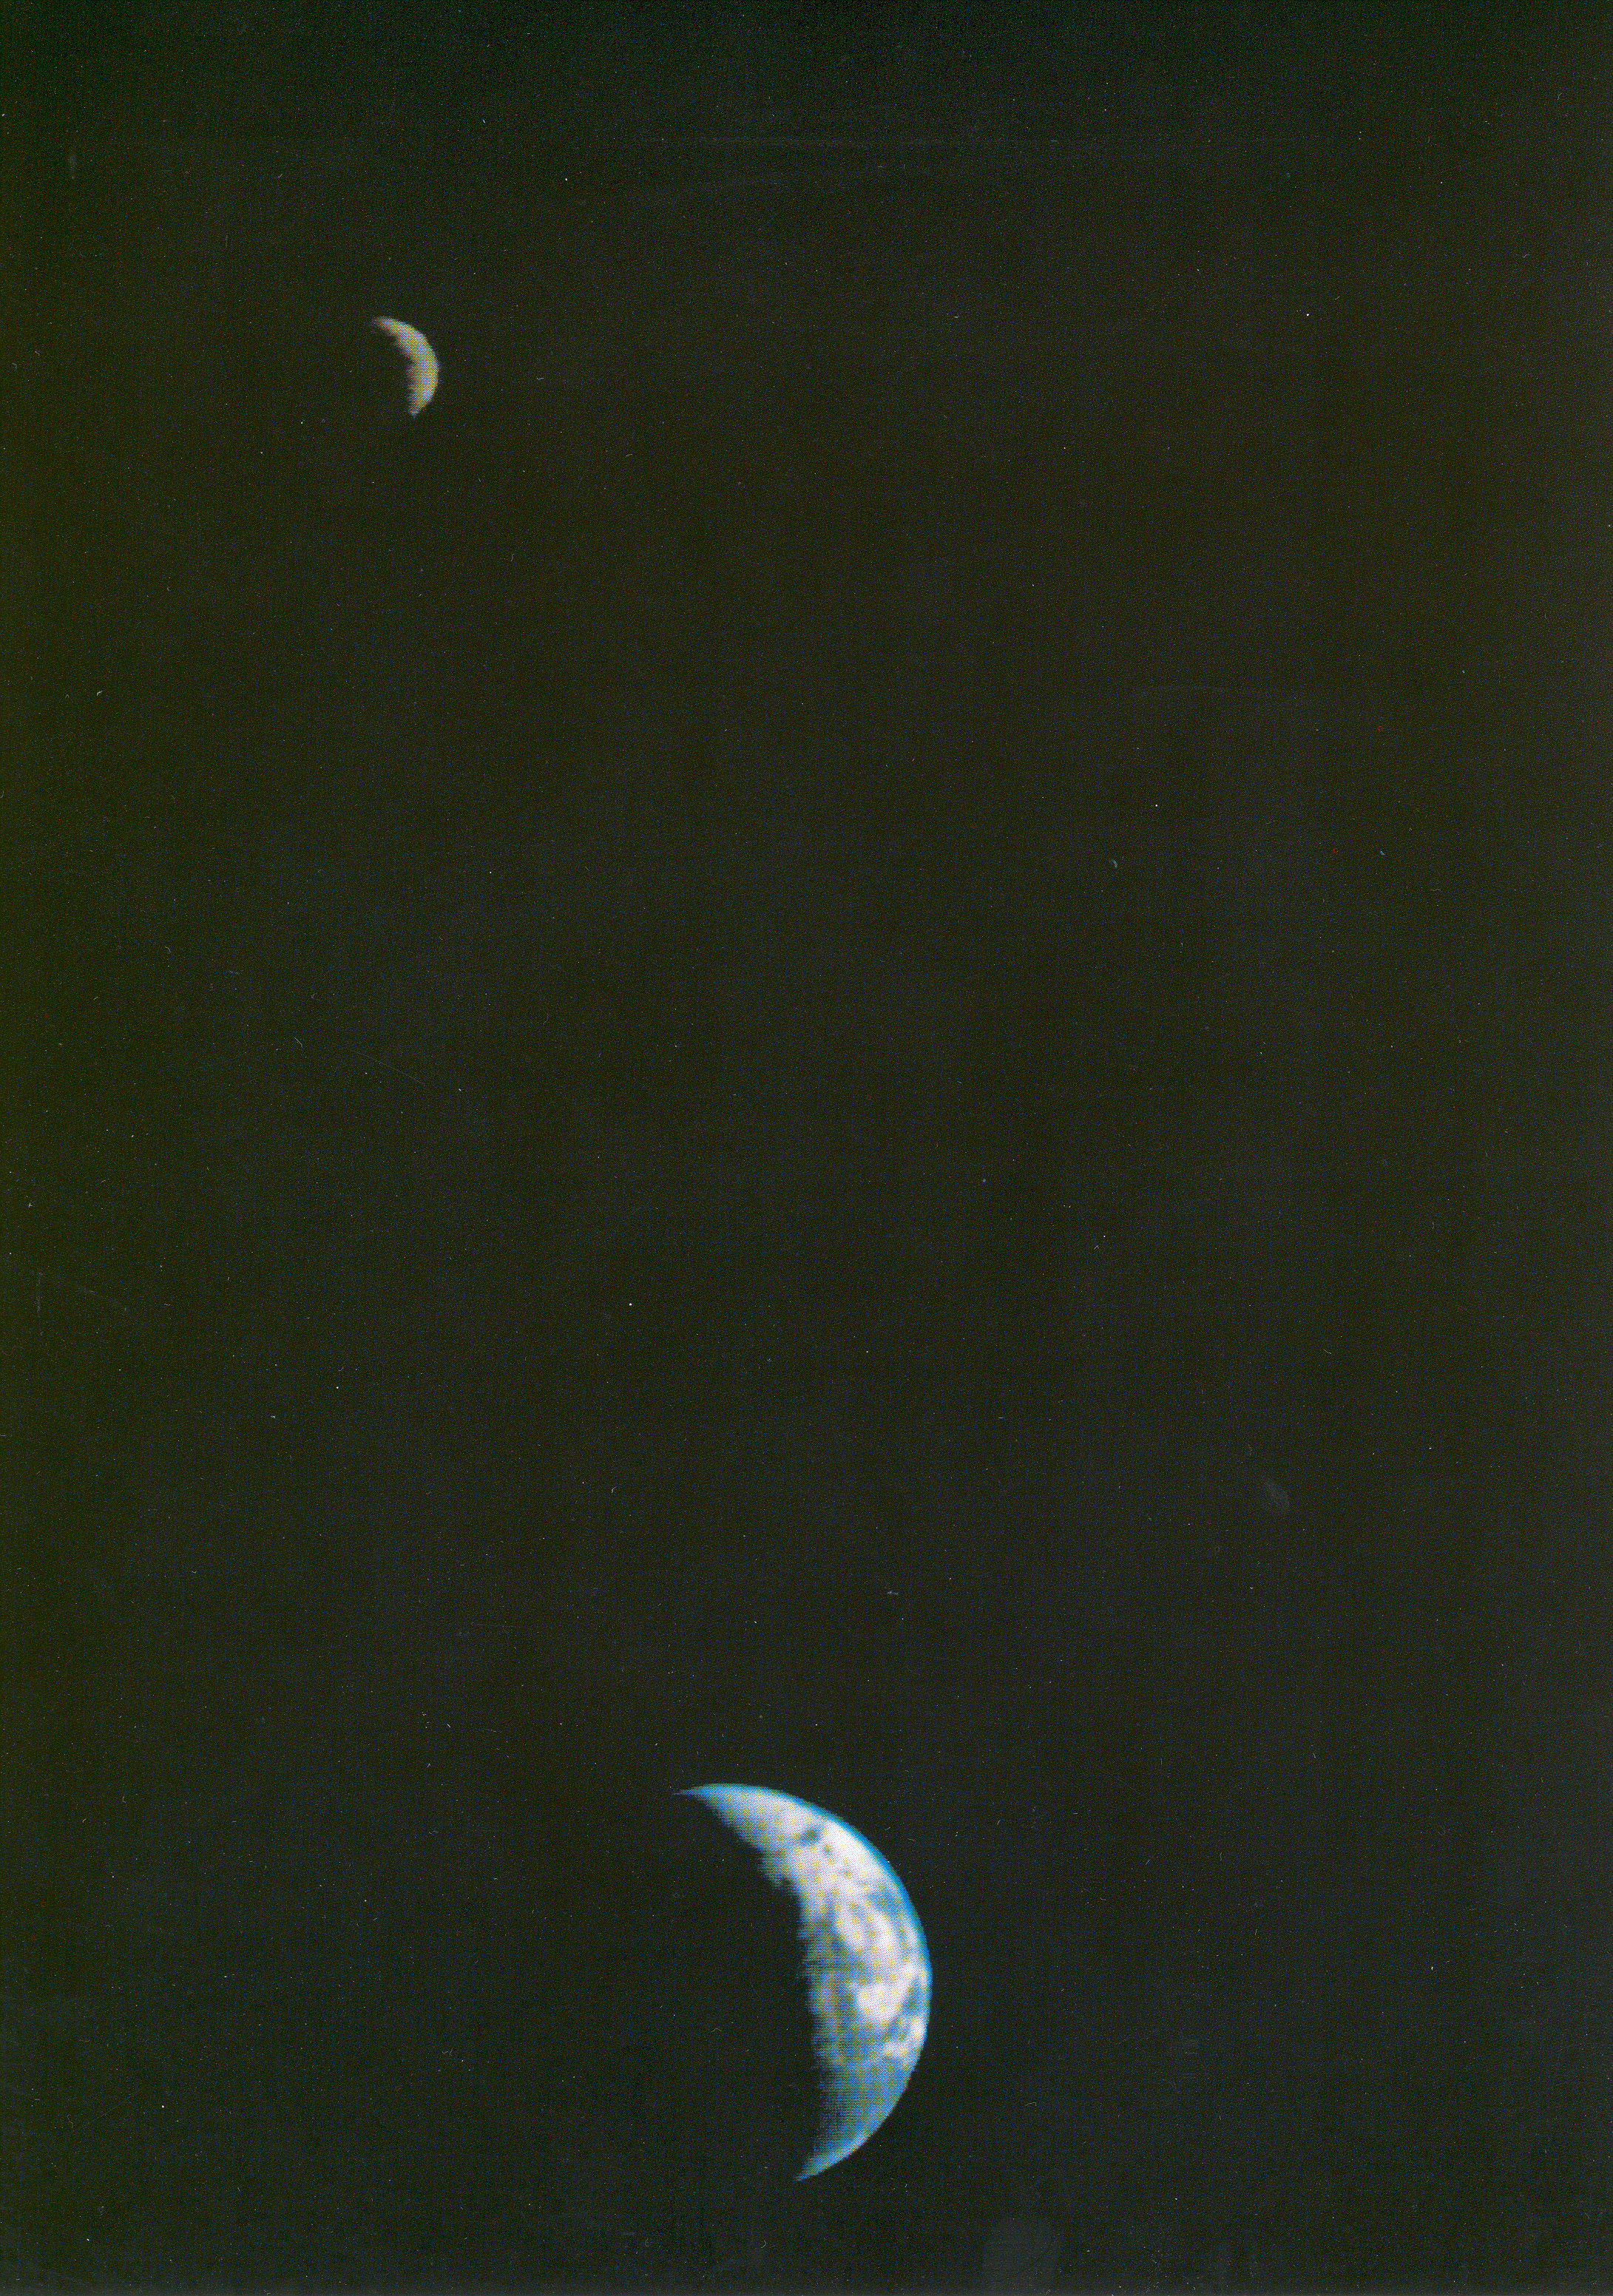 The first image of the Earth-Moon system in a single photographic frame taken by Voyager 1 in 1977 as it departed on its journey to explore Jupiter, Saturn, and beyond